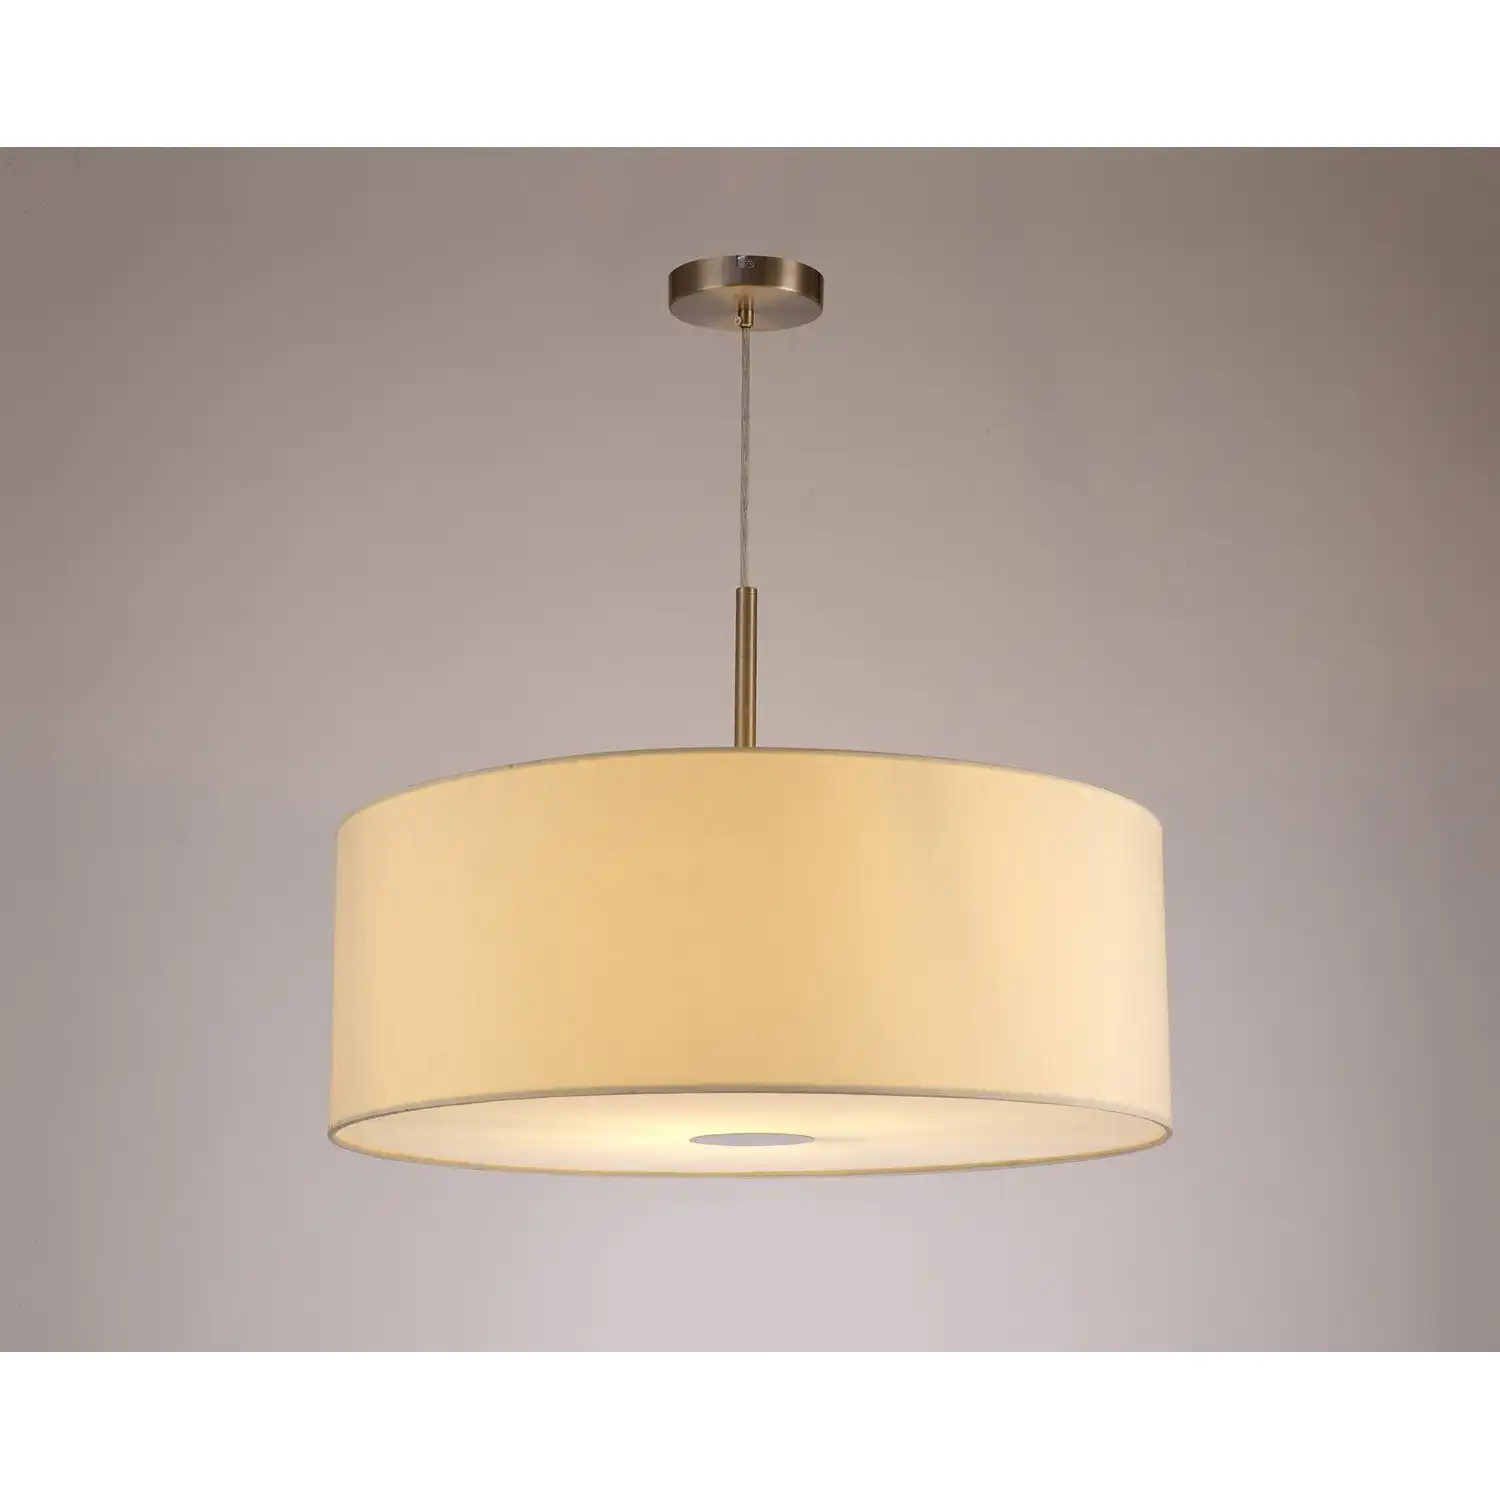 Baymont Satin Nickel 1 Light E27 3m Single Pendant c w 600mm Faux Silk Shade, Ivory Pearl White Laminate c w 600mm Frosted SN Acrylic Diffuser